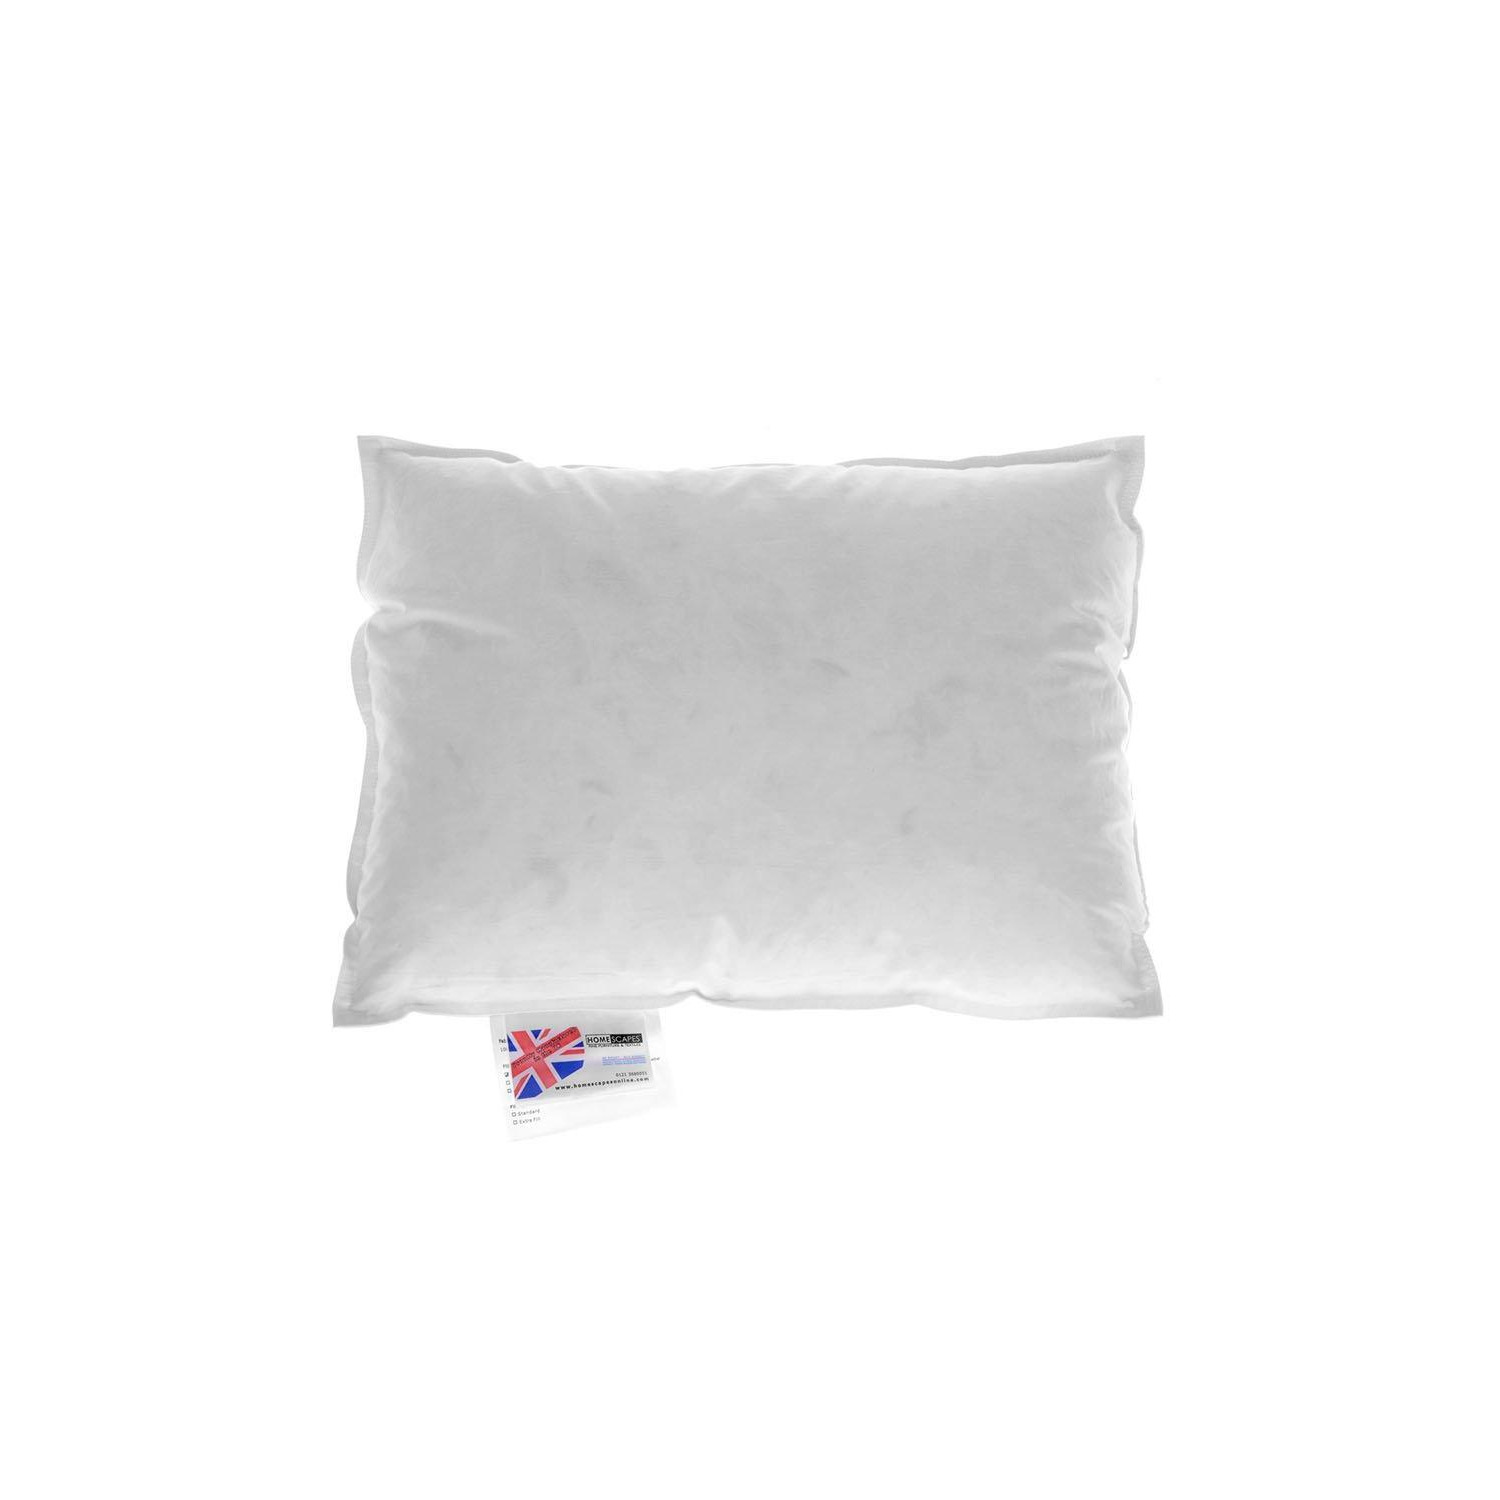 Goose Feather & Down Cushion Pad - image 1